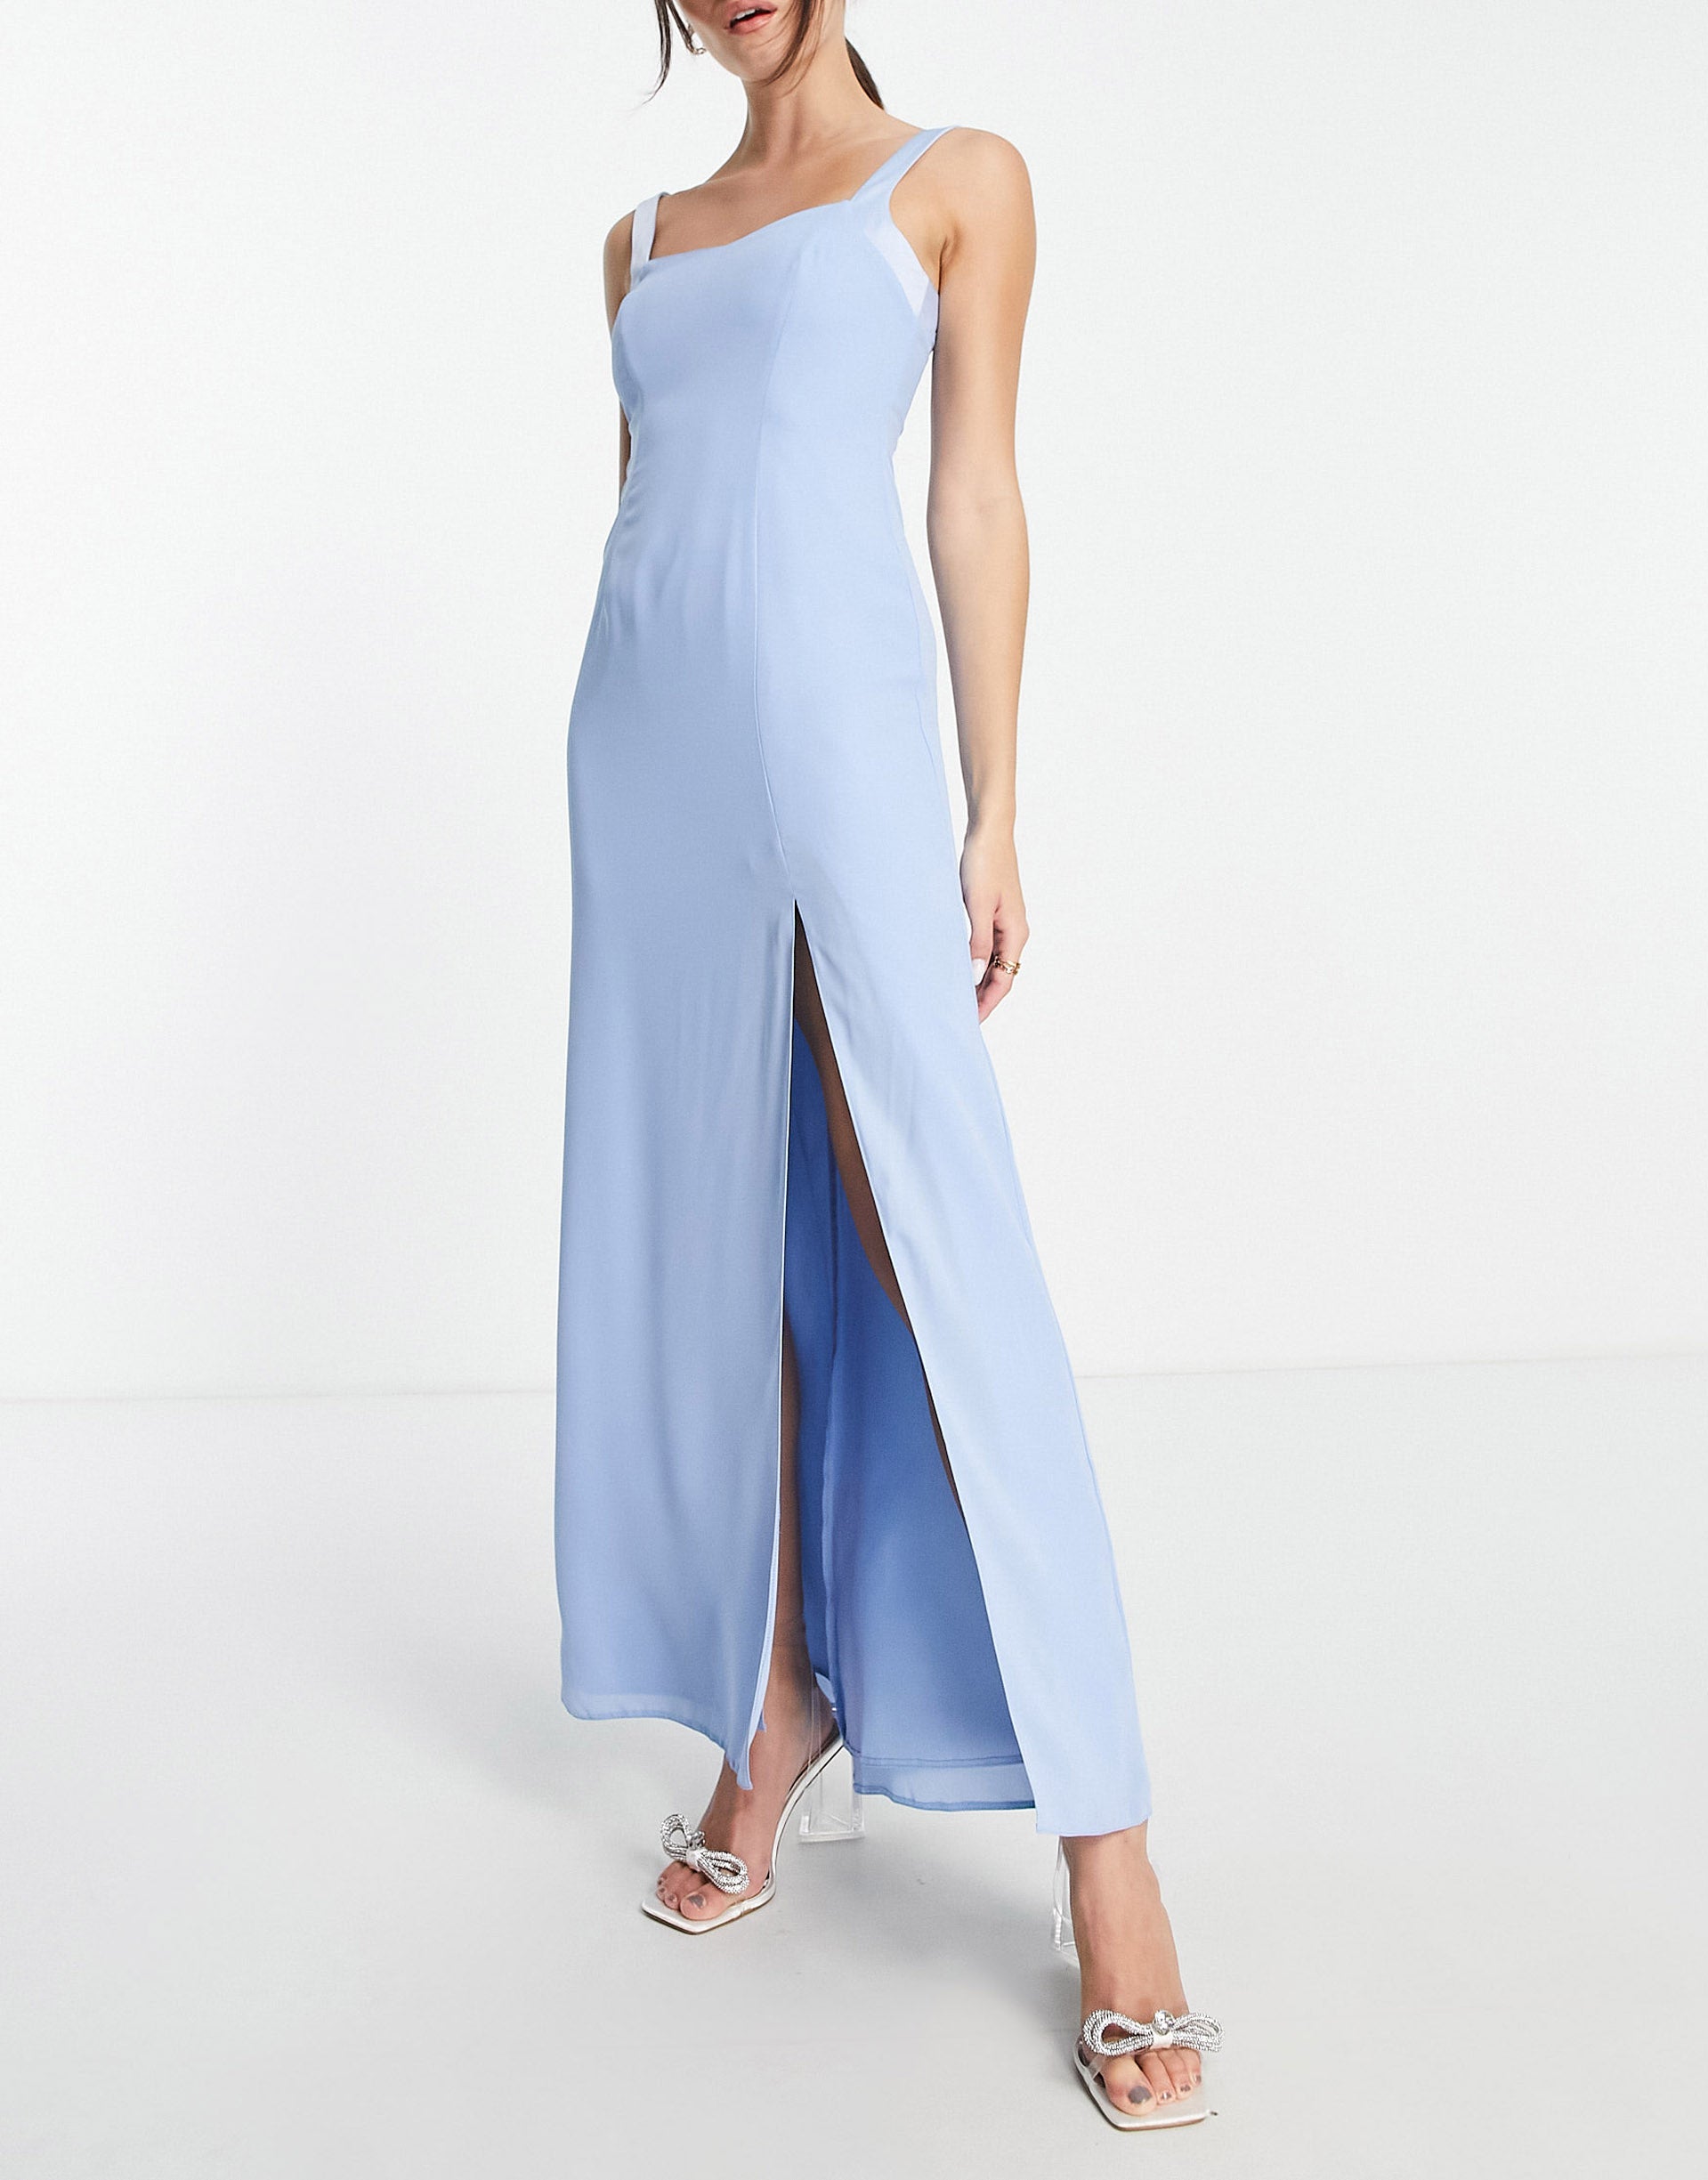 ASOS DESIGN Bridesmaid maxi dress with satin curved neckline and split detail in powder blue